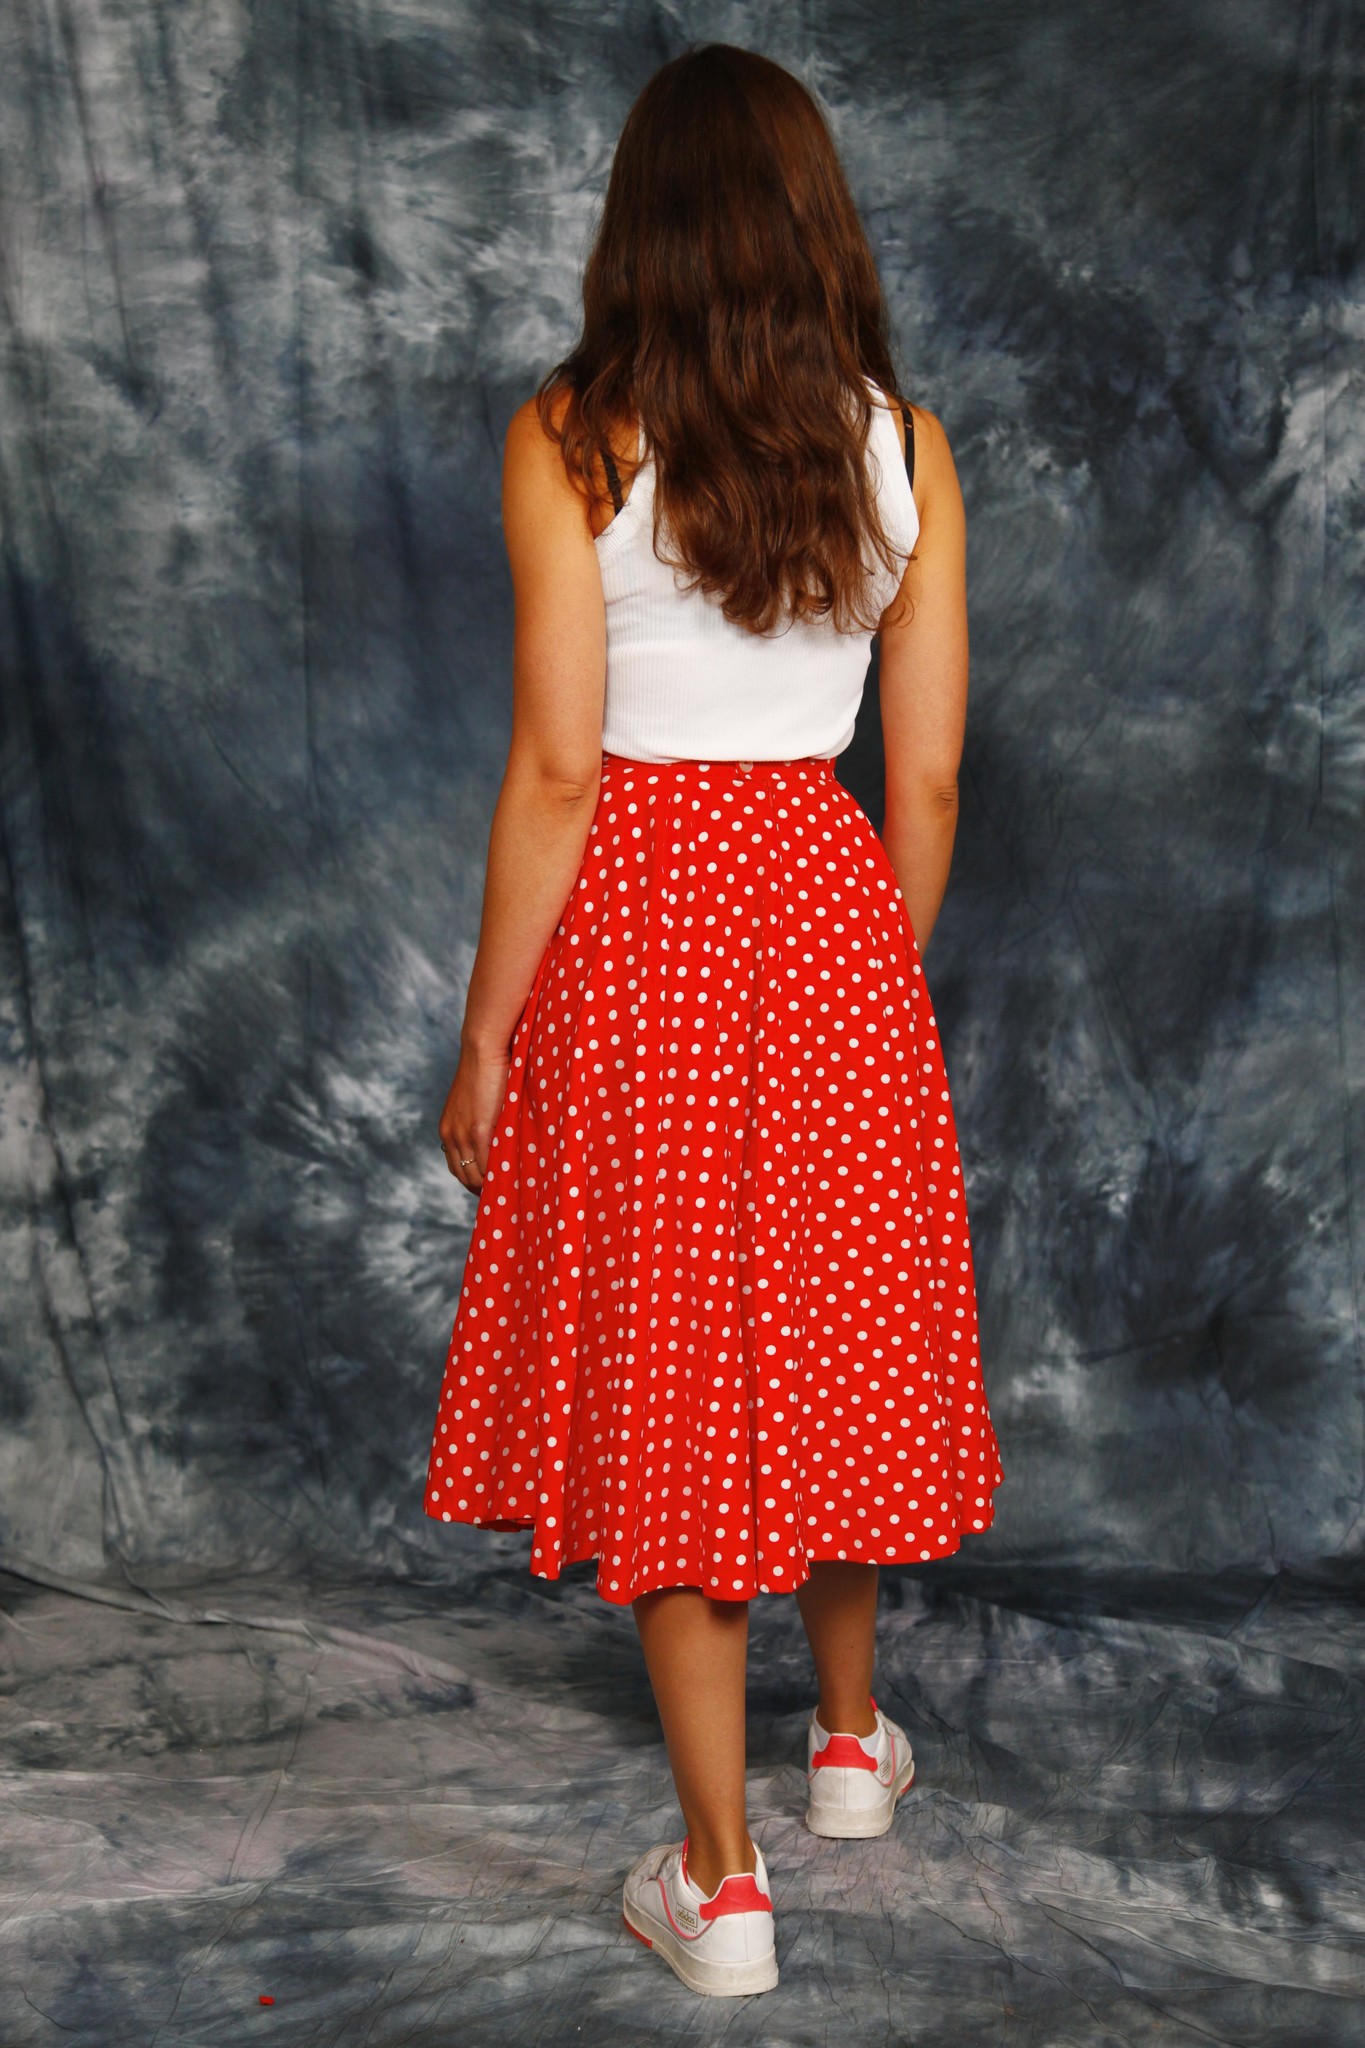 red polka dot skirt outfit